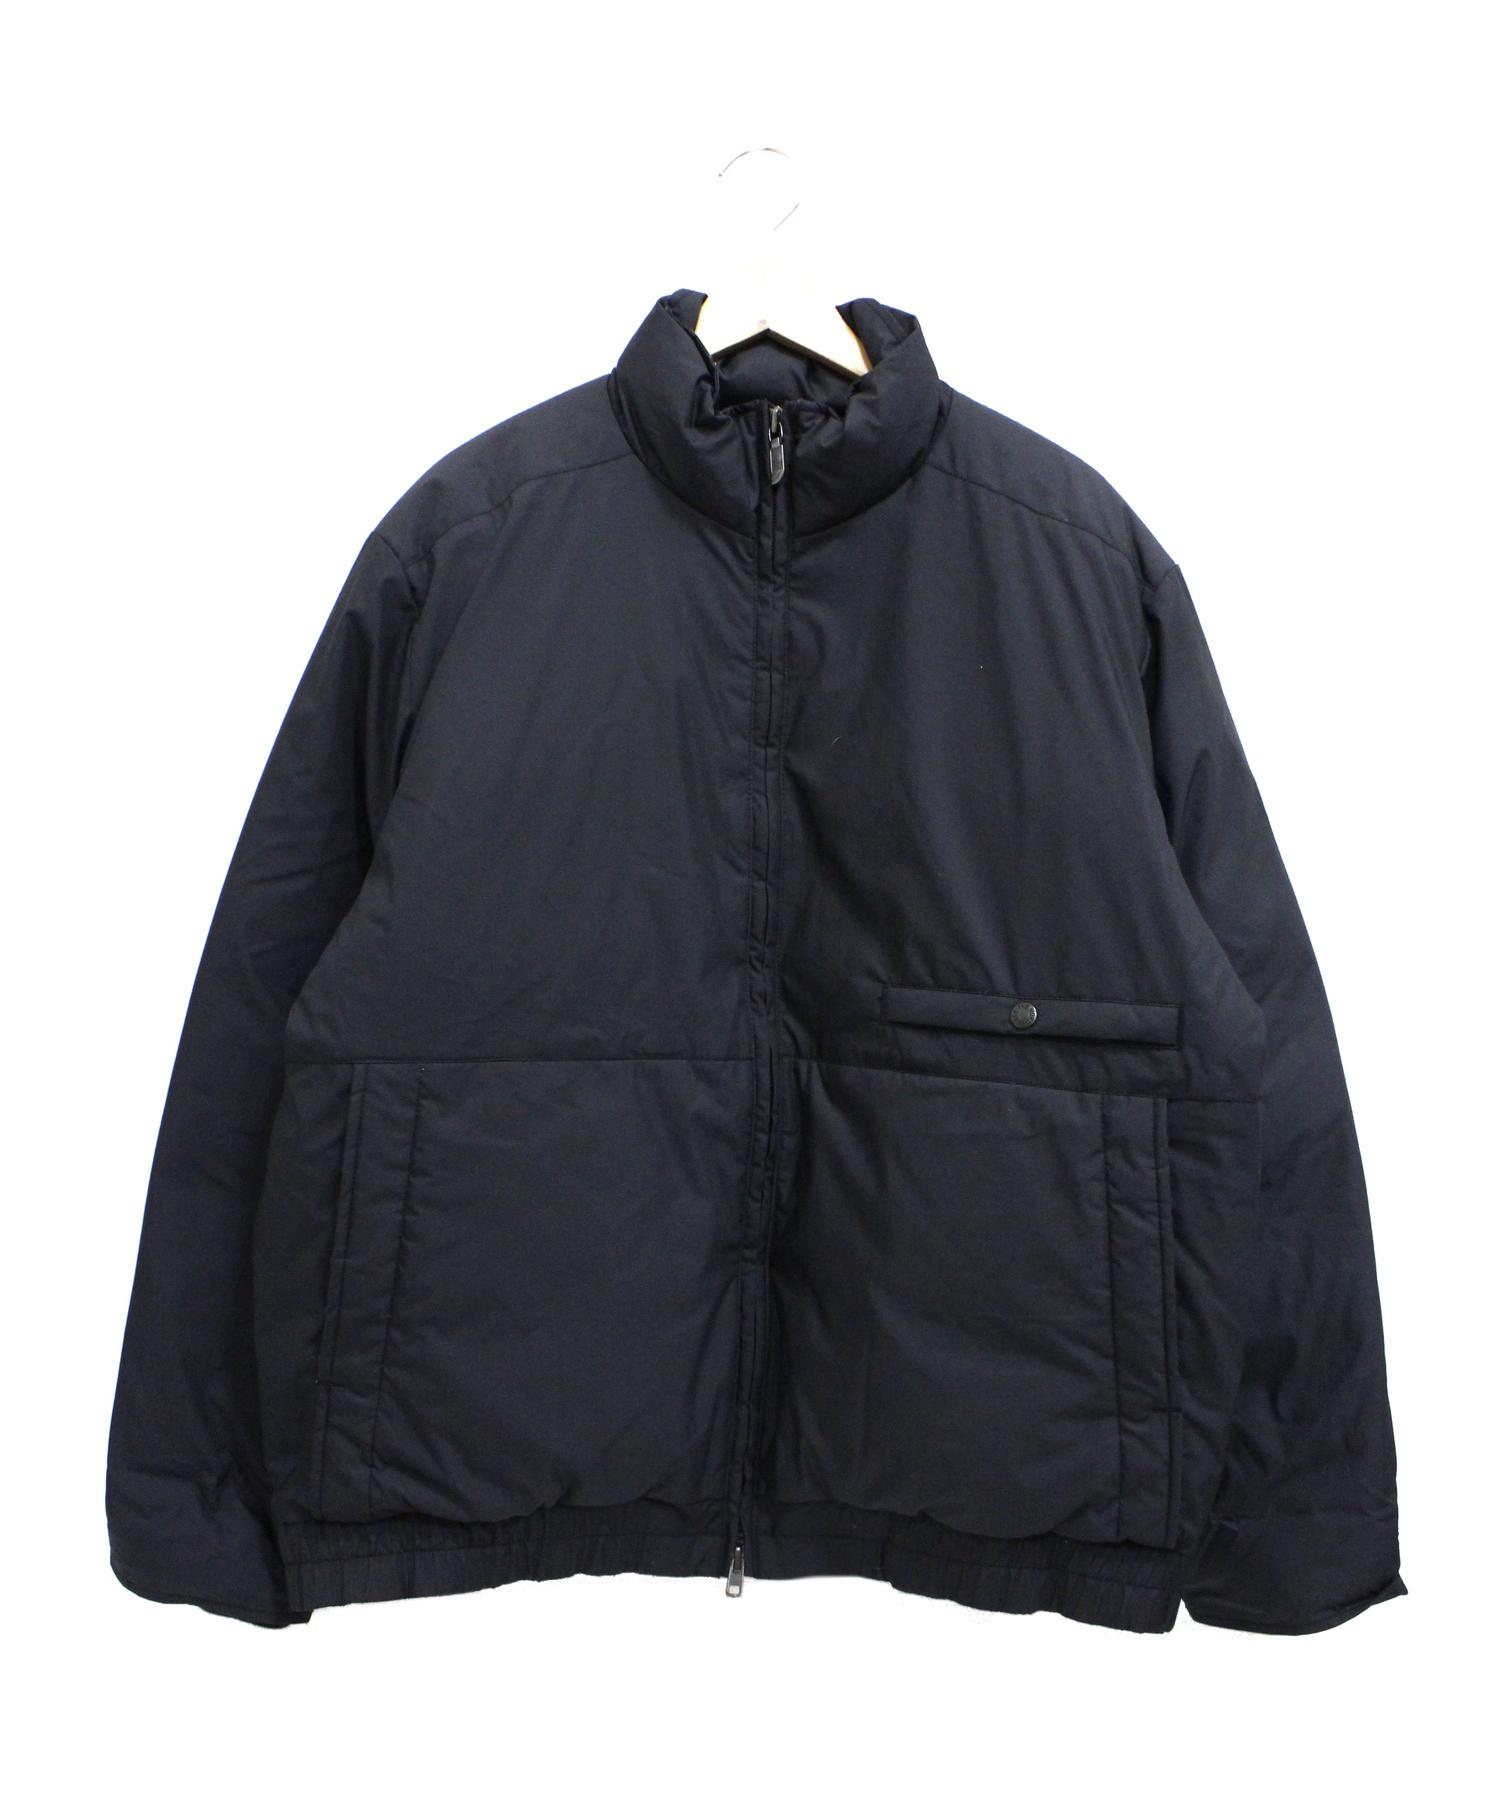 north face purple down jacket